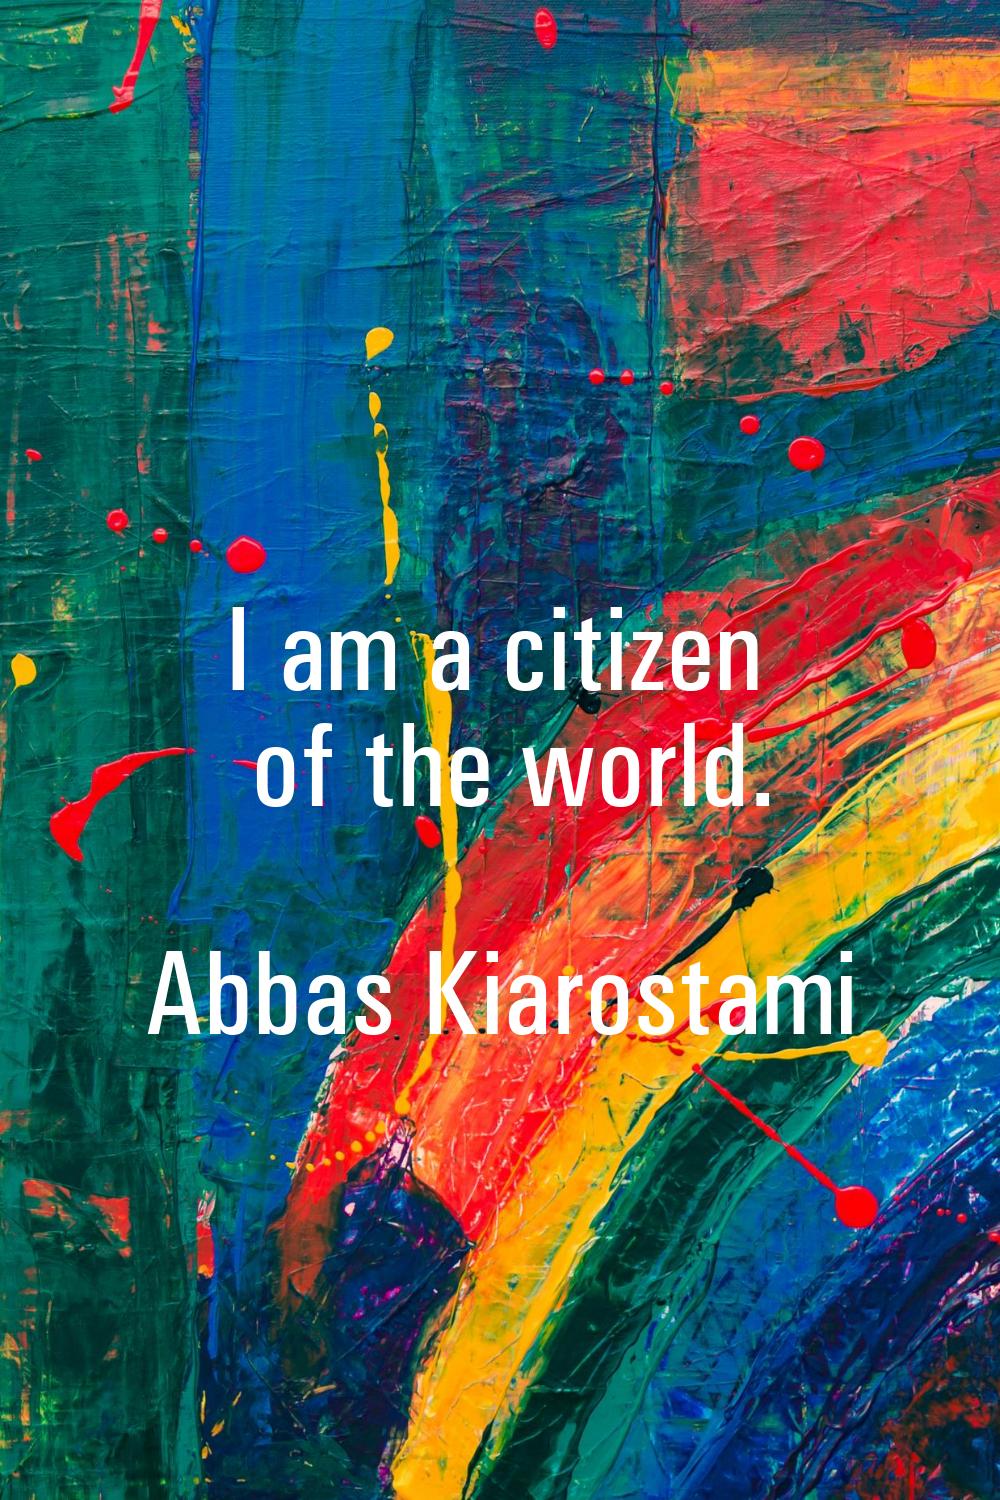 I am a citizen of the world.